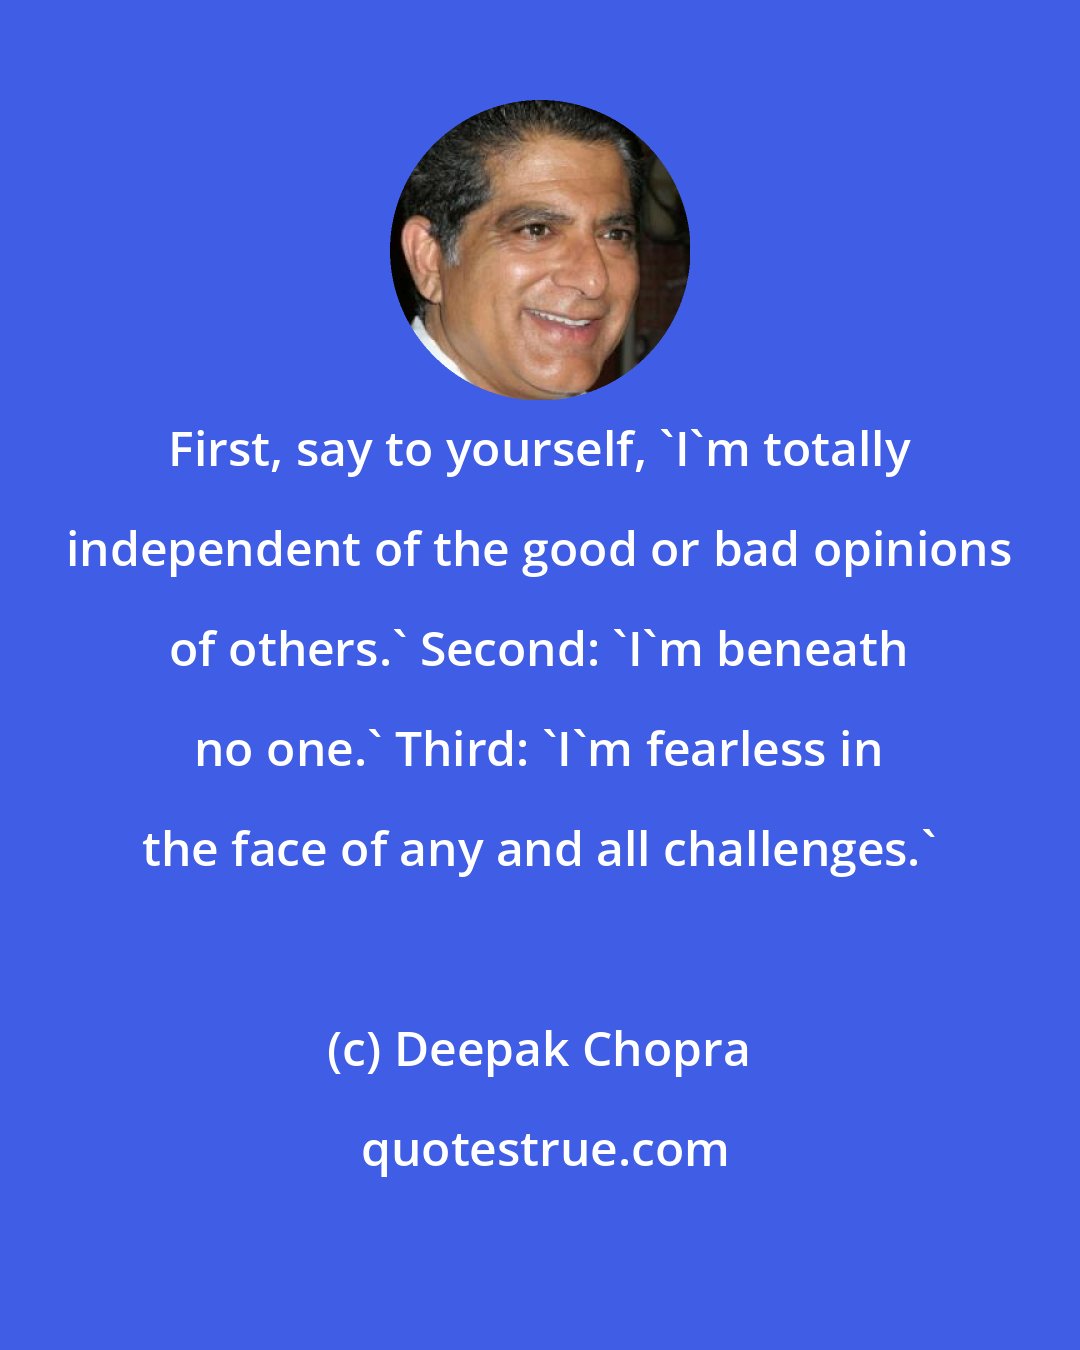 Deepak Chopra: First, say to yourself, 'I'm totally independent of the good or bad opinions of others.' Second: 'I'm beneath no one.' Third: 'I'm fearless in the face of any and all challenges.'